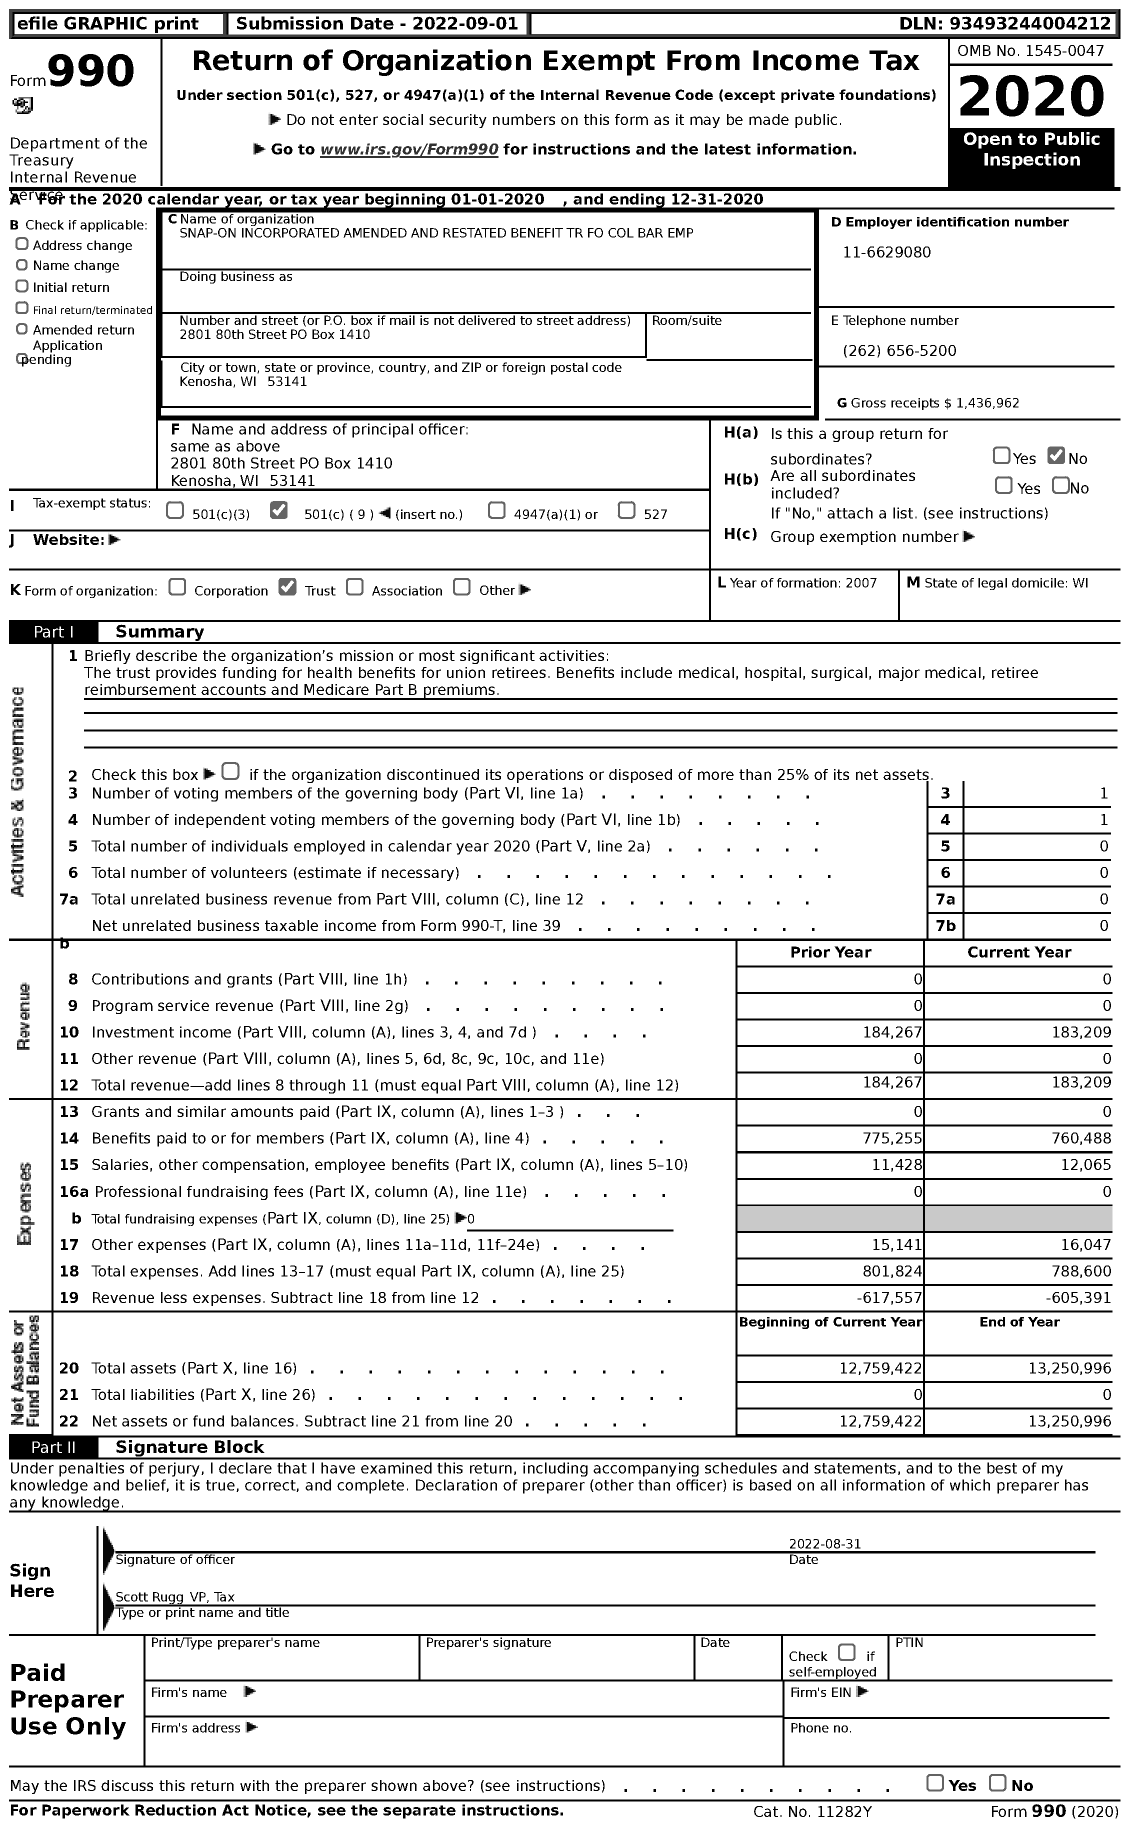 Image of first page of 2020 Form 990 for Snap-On Incorporated Amended and Restated Benefit Trust for Collectively Bargained Employees